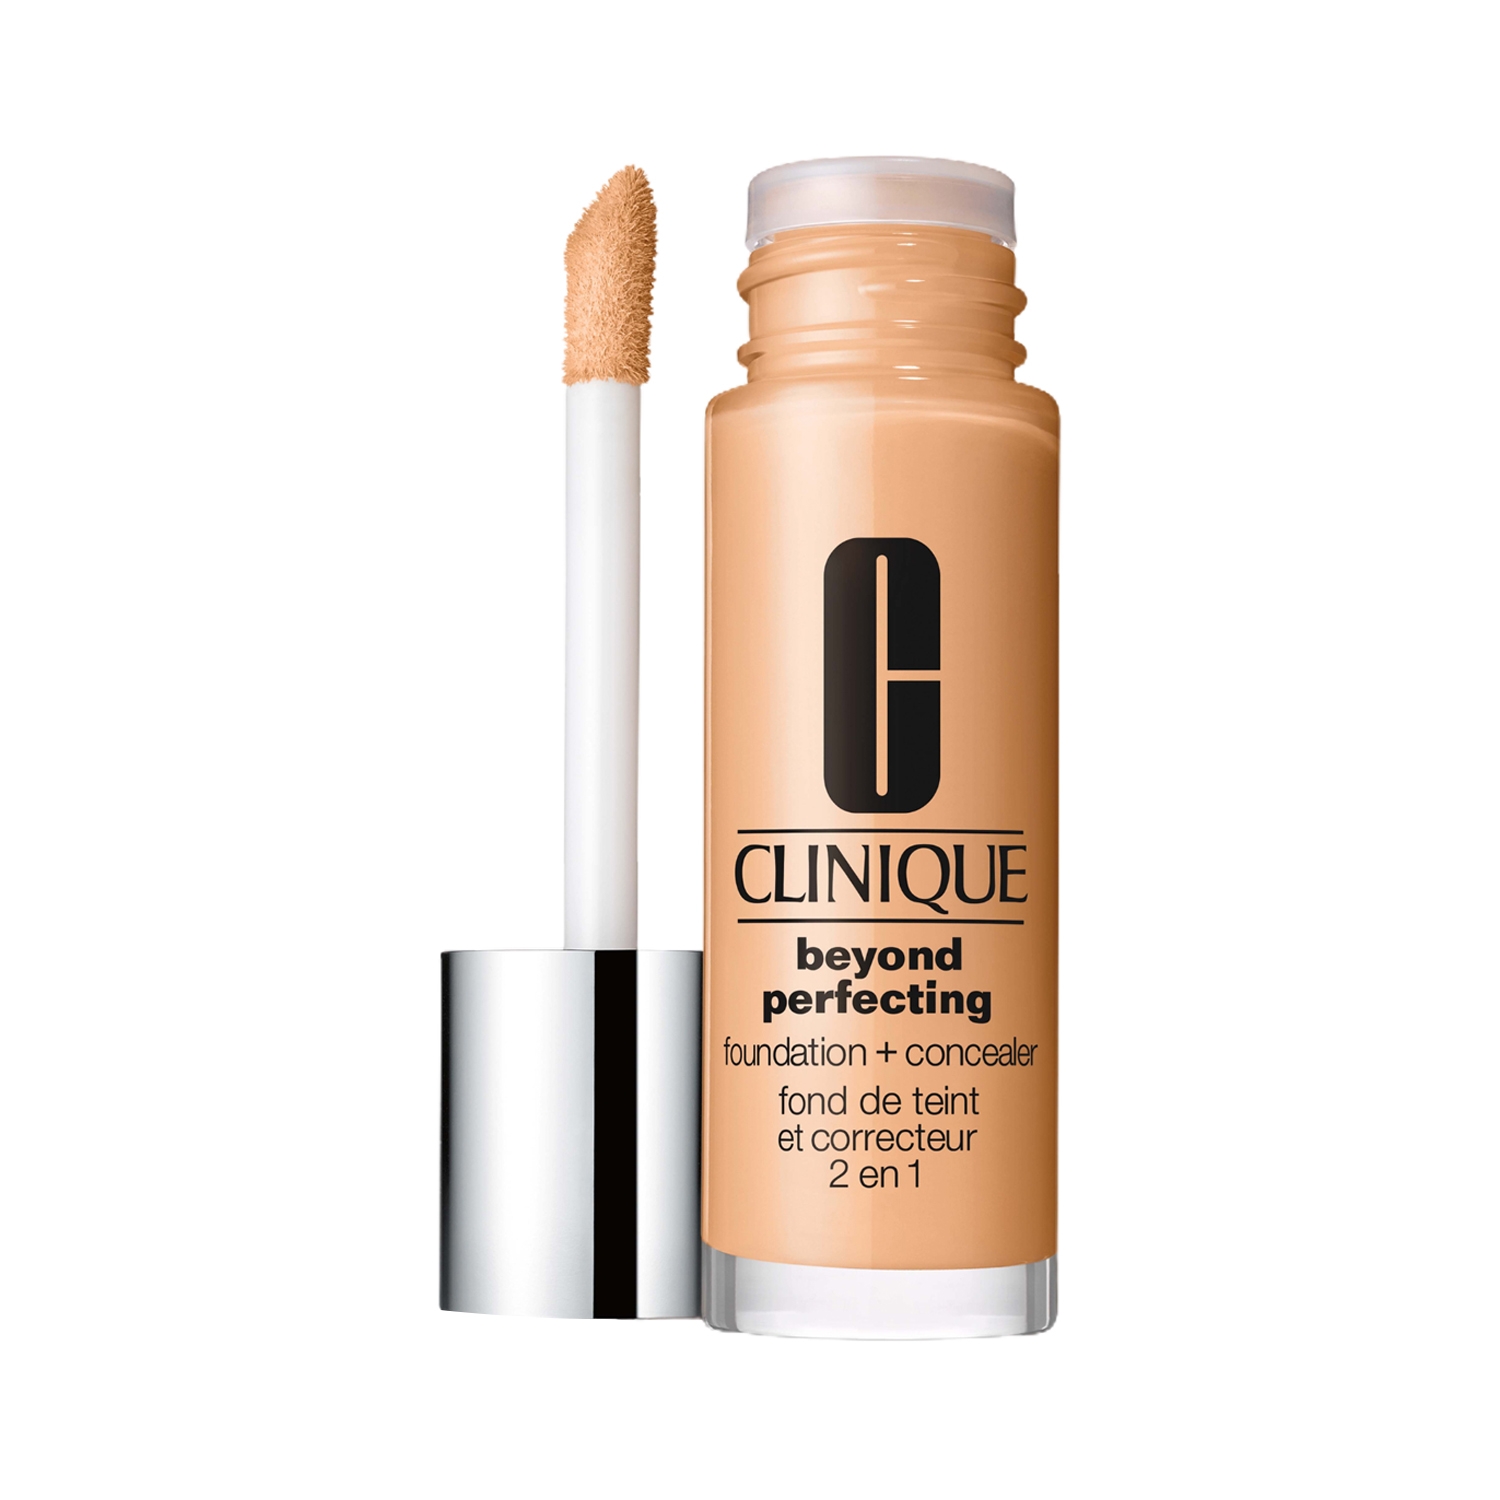 CLINIQUE | CLINIQUE Beyond Perfecting Foundation + Concealer - WN 48 Oat (30ml)